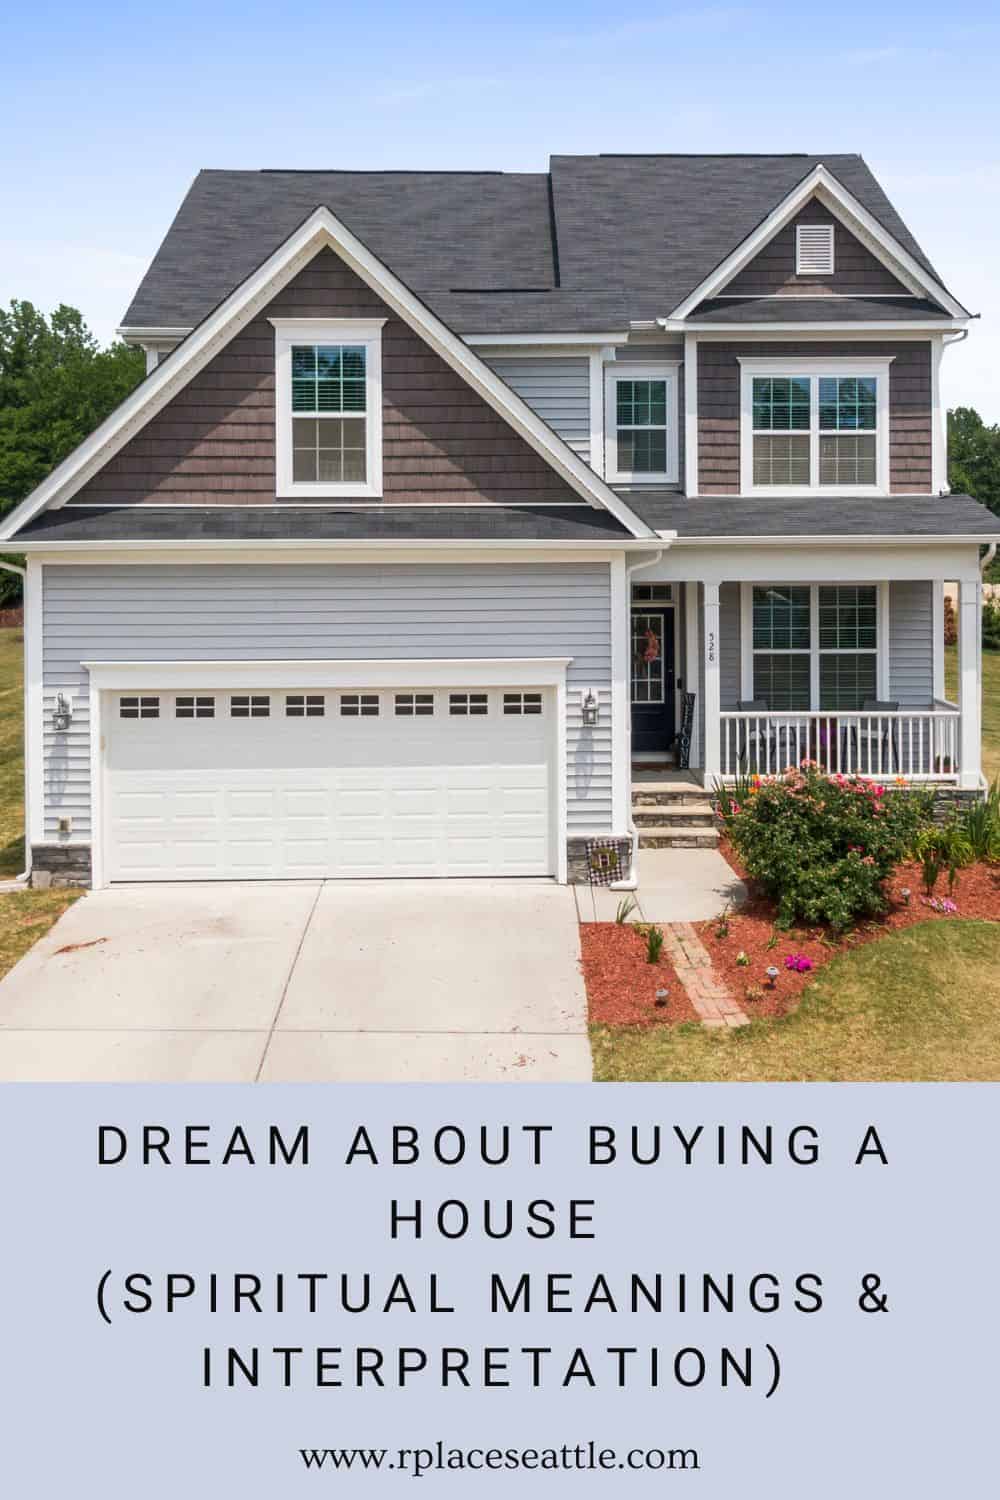 Dream About Buying A House (Spiritual Meanings & Interpretation)